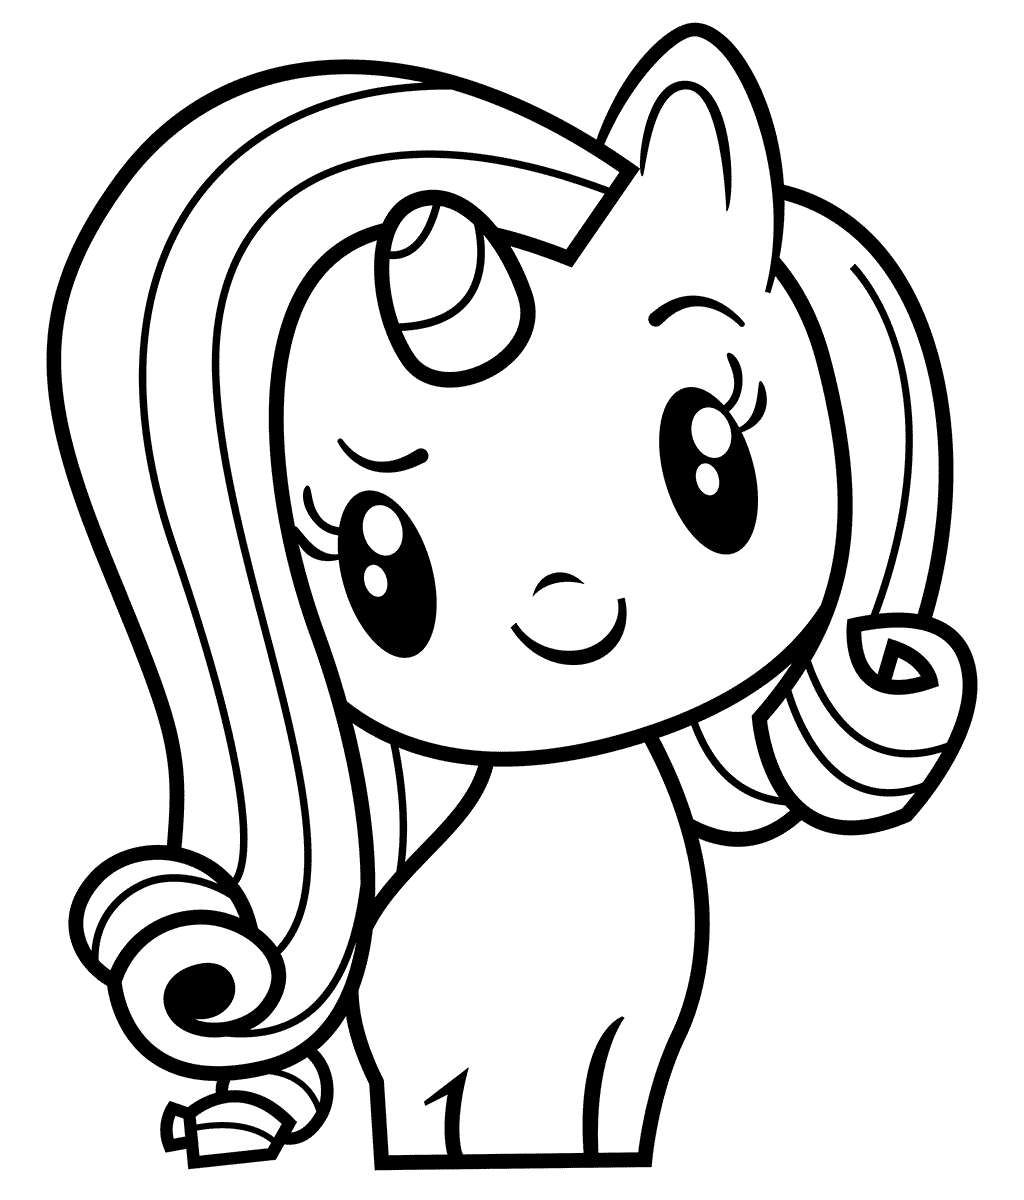 rarity coloring page rarity coloring pages best coloring pages for kids rarity page coloring 